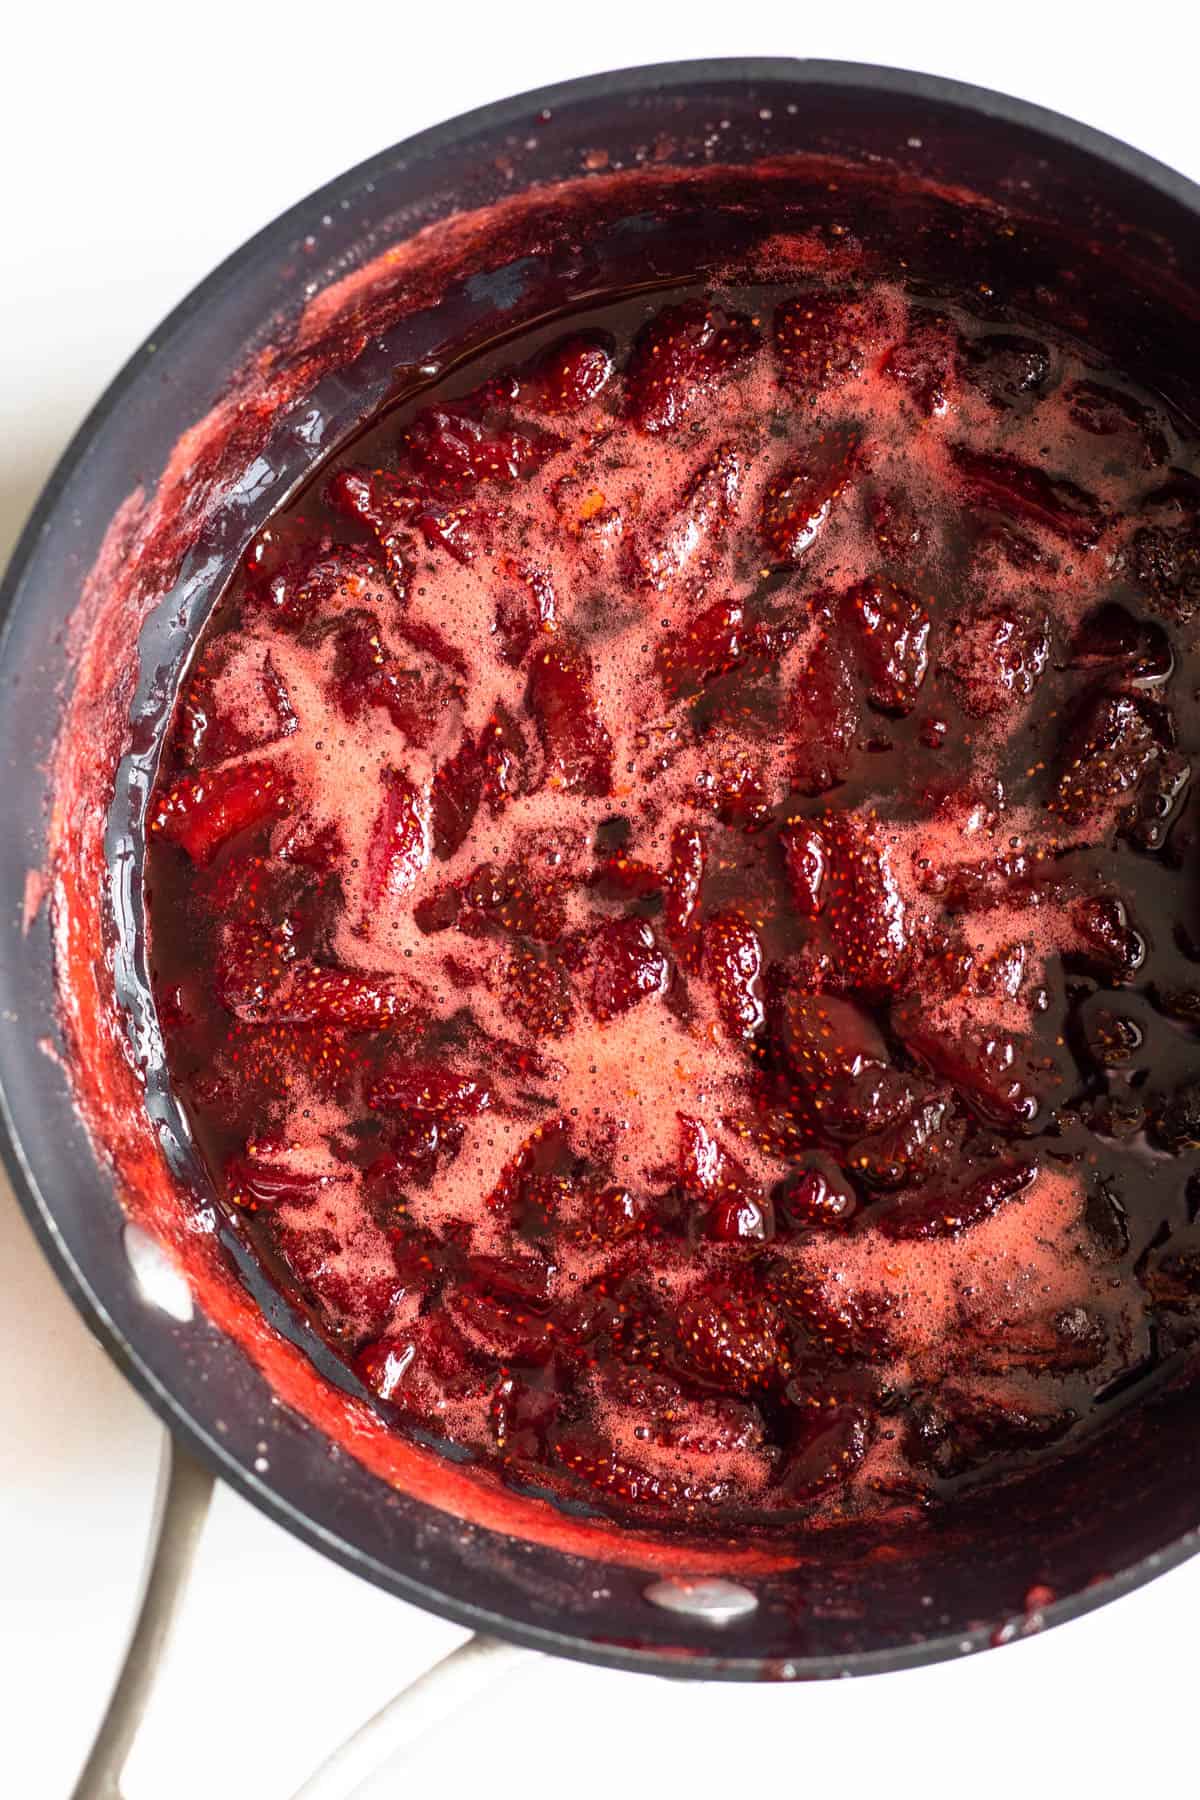 strawberry jam ingredients combined and boiling 